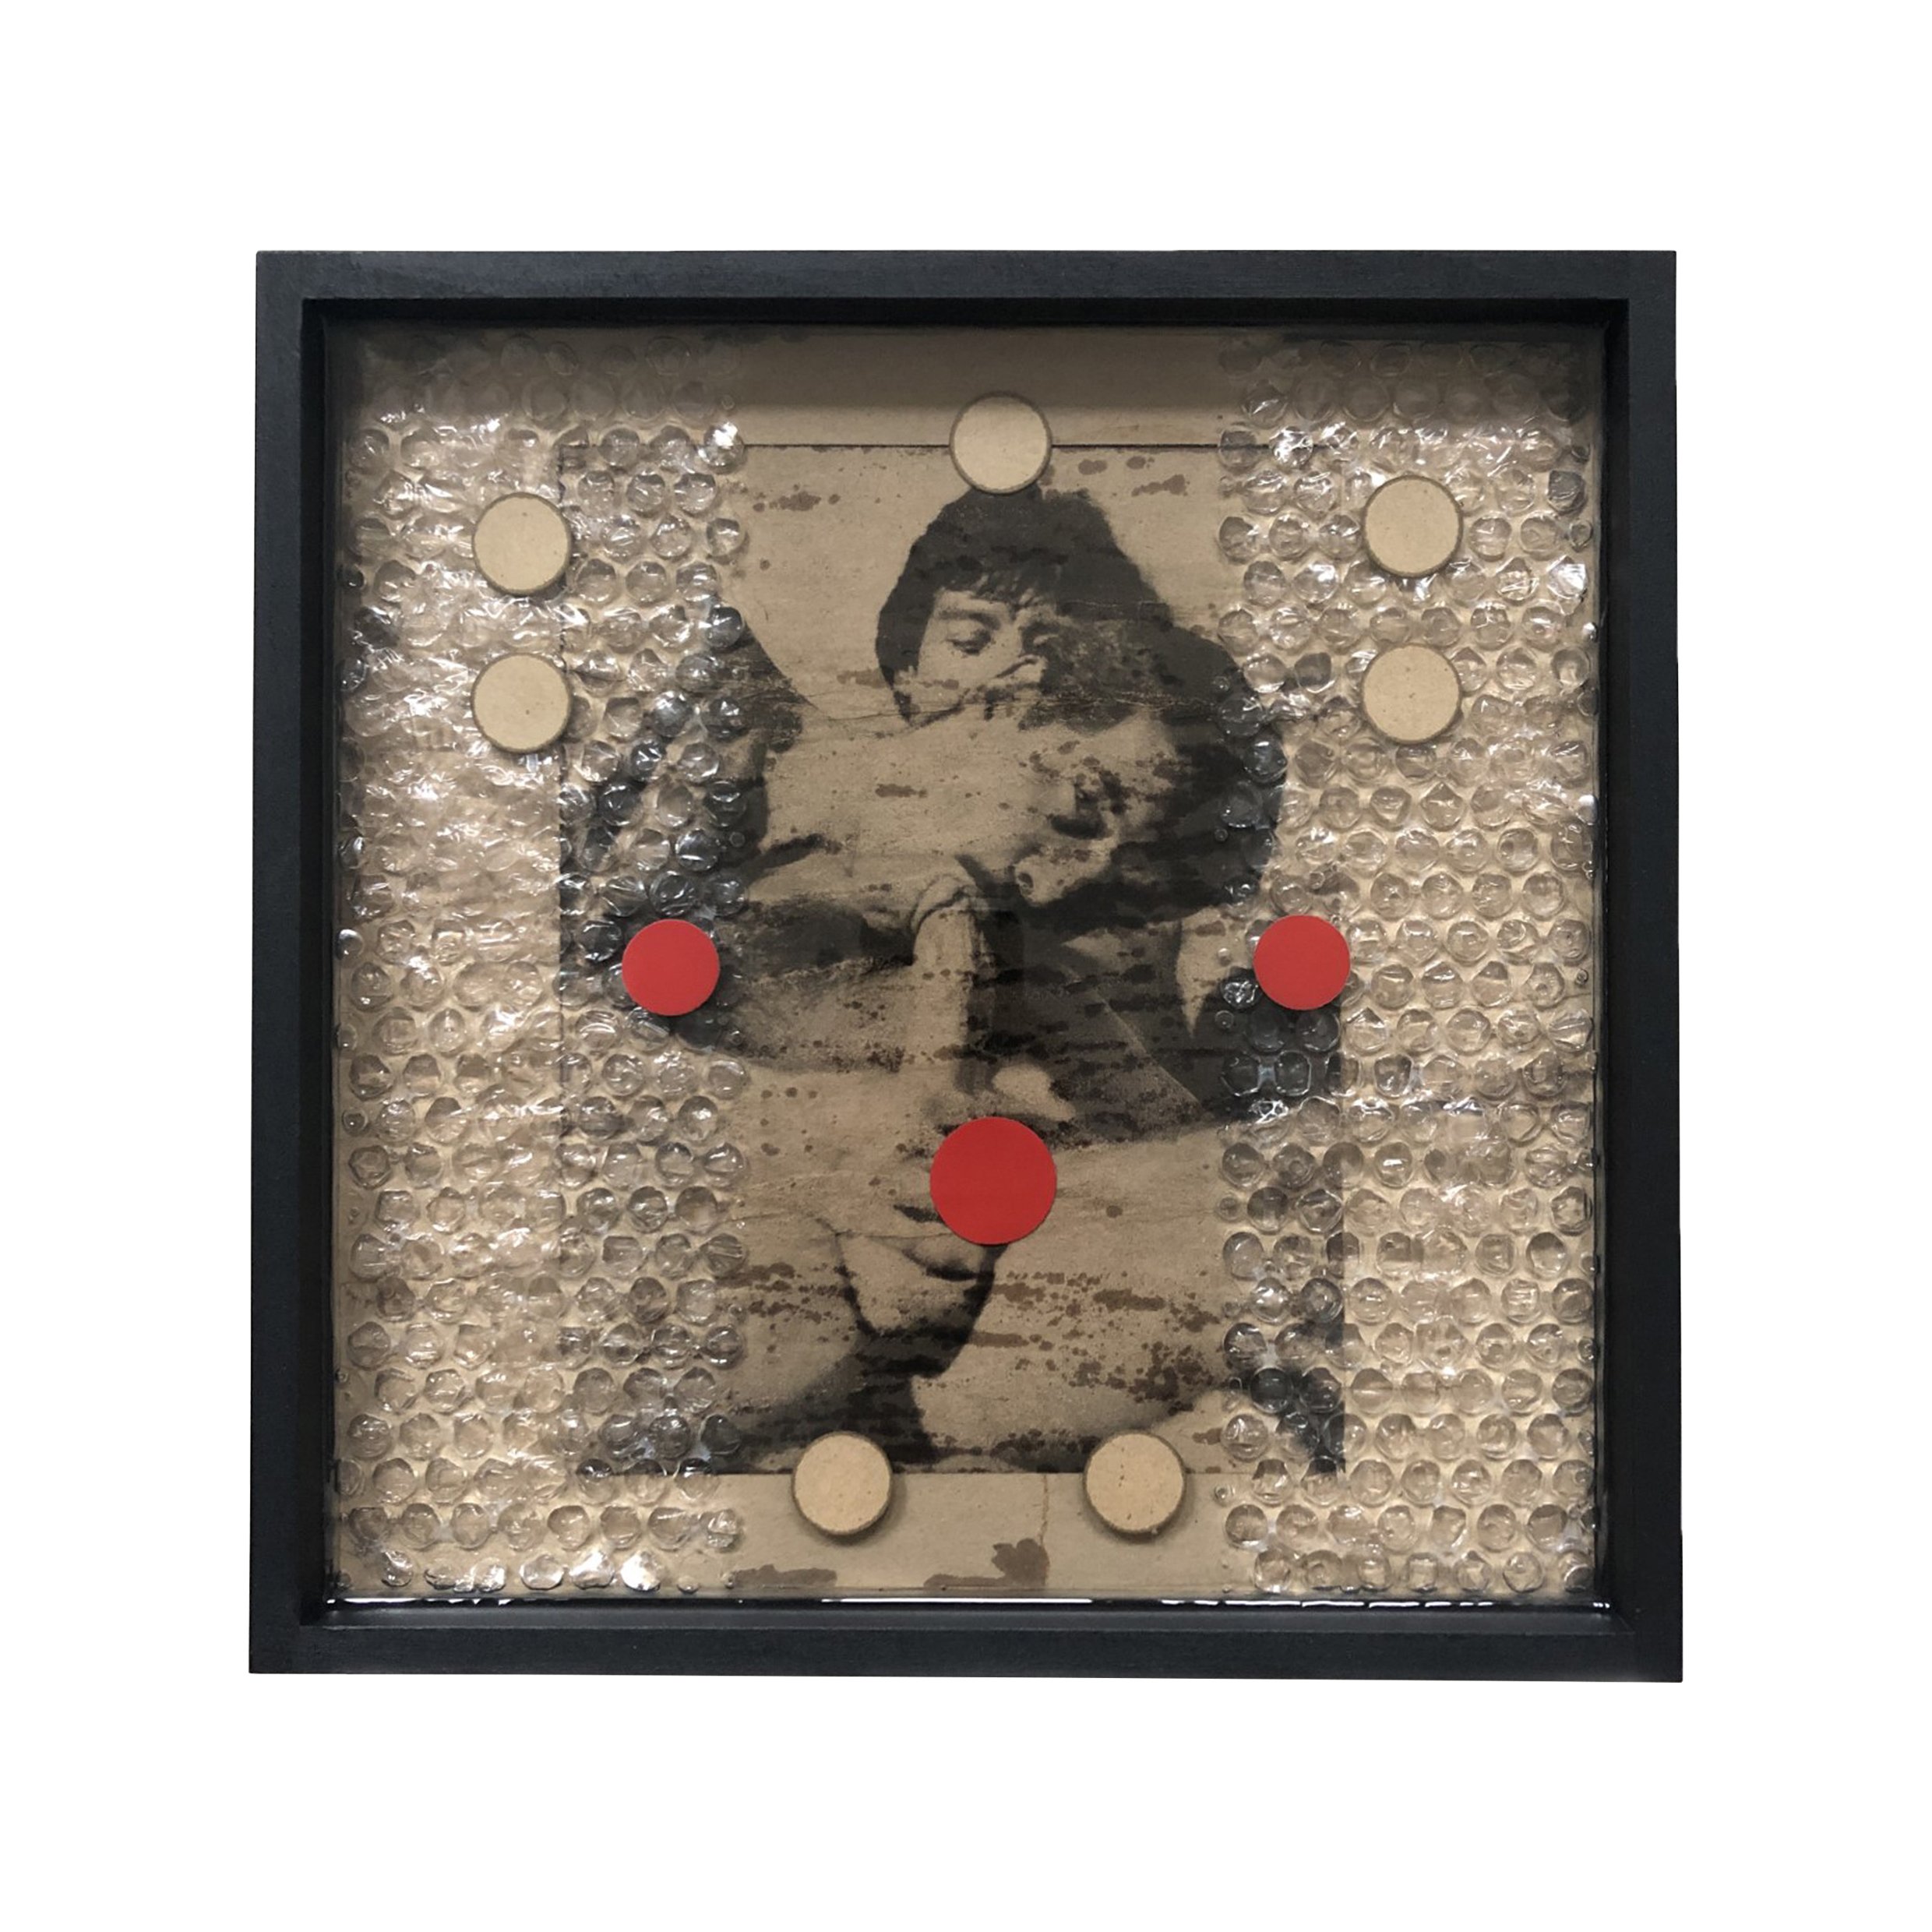  Object from “OBJECTS” series - mixed media, signed and titled on the back  (2021)  [30x30x3cm] 